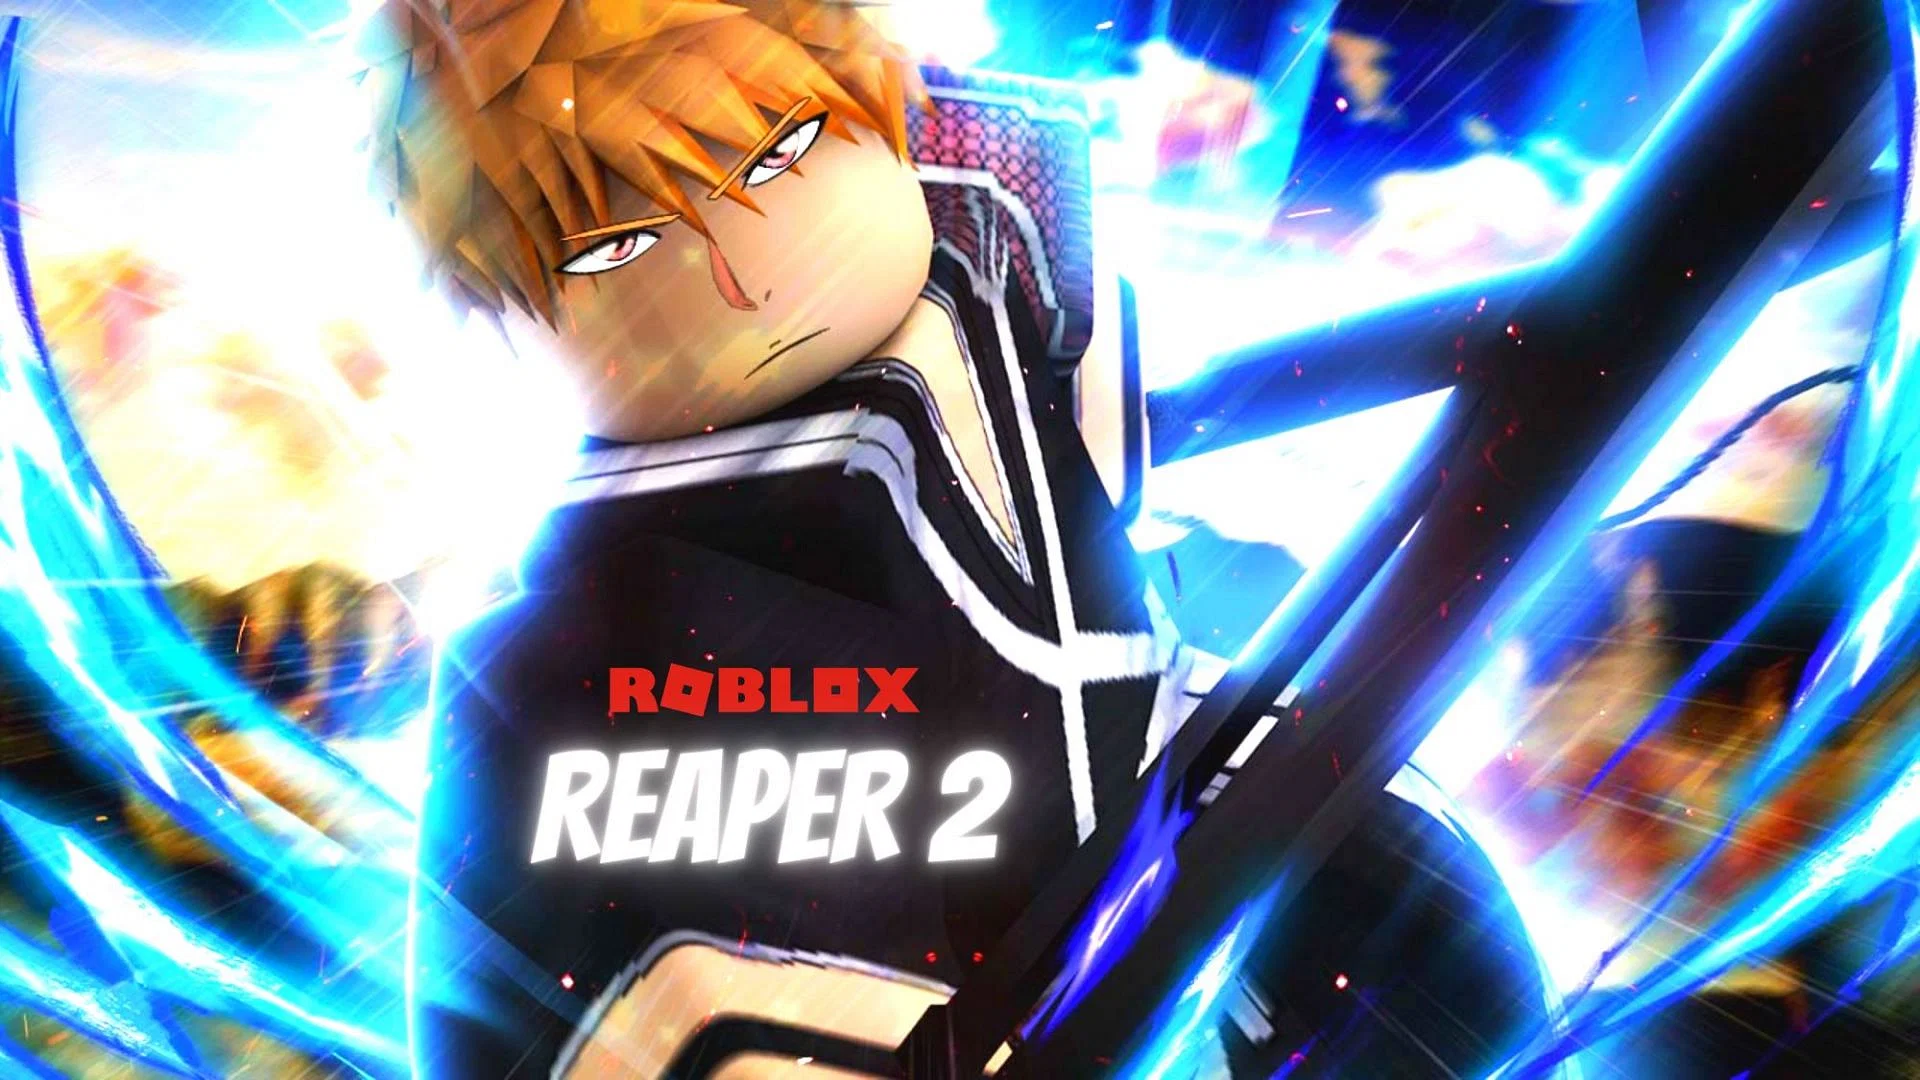 Roblox: Reaper 2 Codes For August 2022